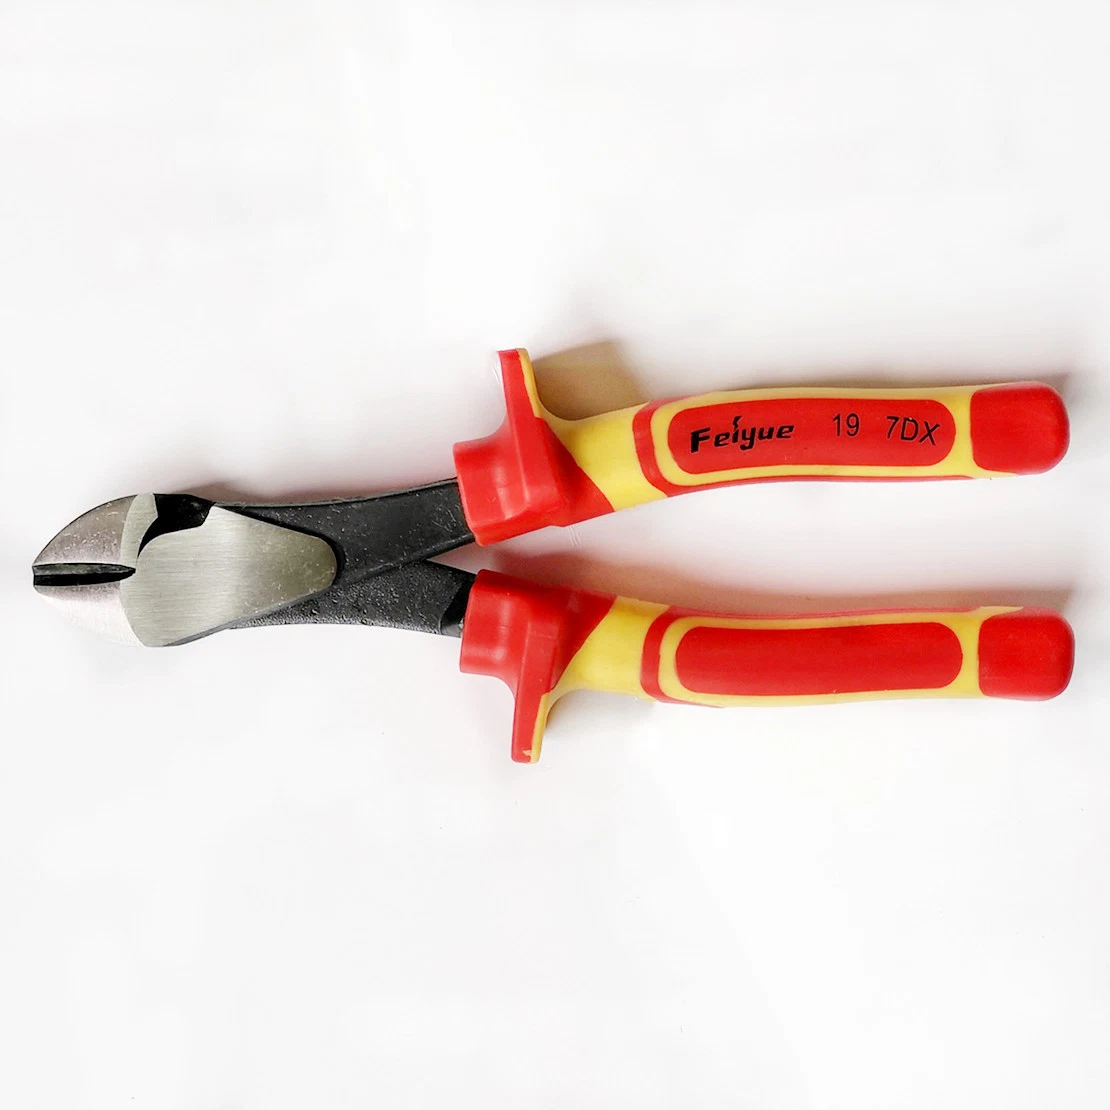 Professional VDE Combination Pliers, Hand Tool, Hardware Tool, Cutting Tools, with Certificate, 1000V Handle, VDE Pliers, Insulating Tools